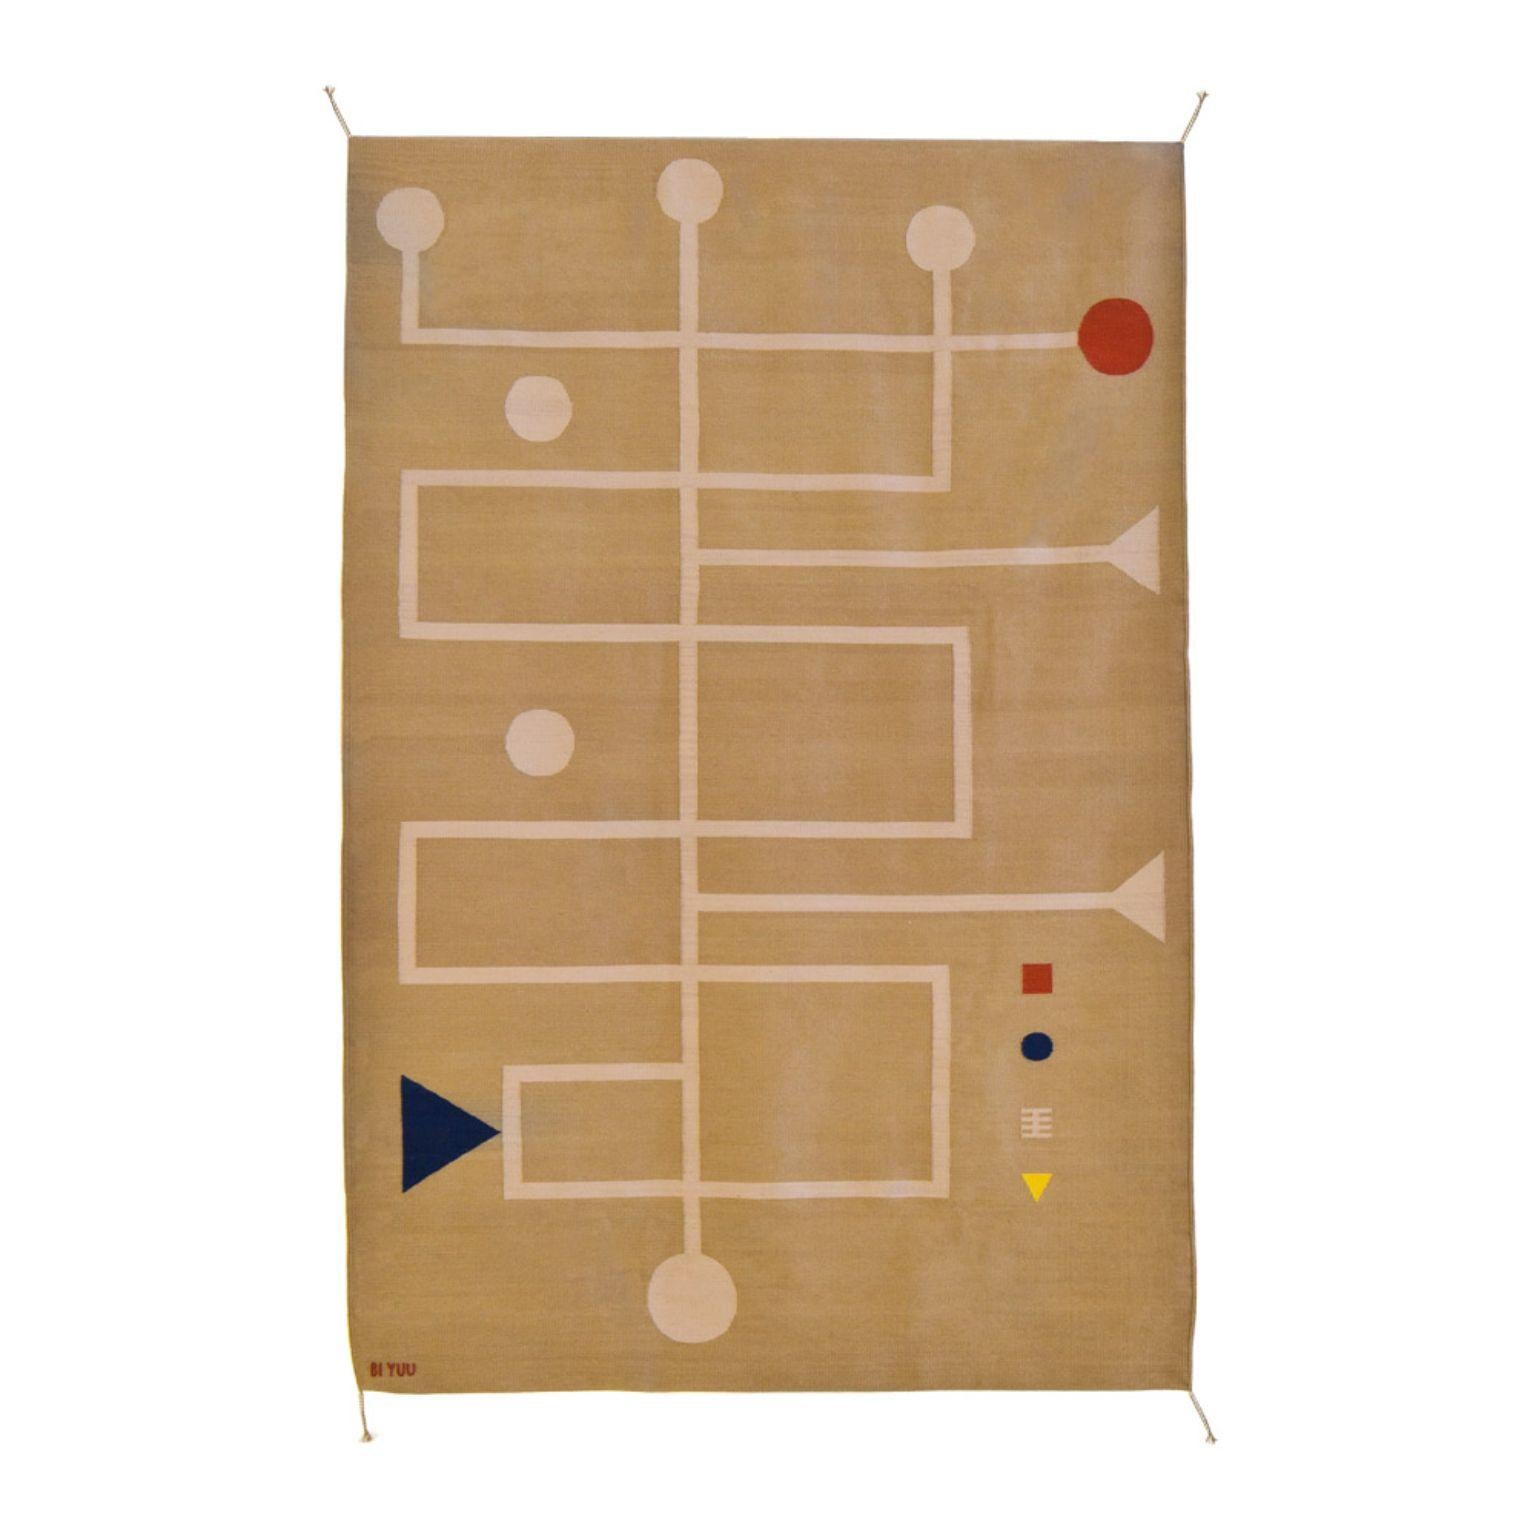 Ares I A02 Rug by Bi Yuu
Dimensions: D200 x 300 H cm
Material: 70% Lincoln Wool / 30% Merino Wool
Density: 2800 yam passes per m2.
Also Available in different dimensions. Dye: Natural and Colorants.

She founded Bi Yuu with the vision that the